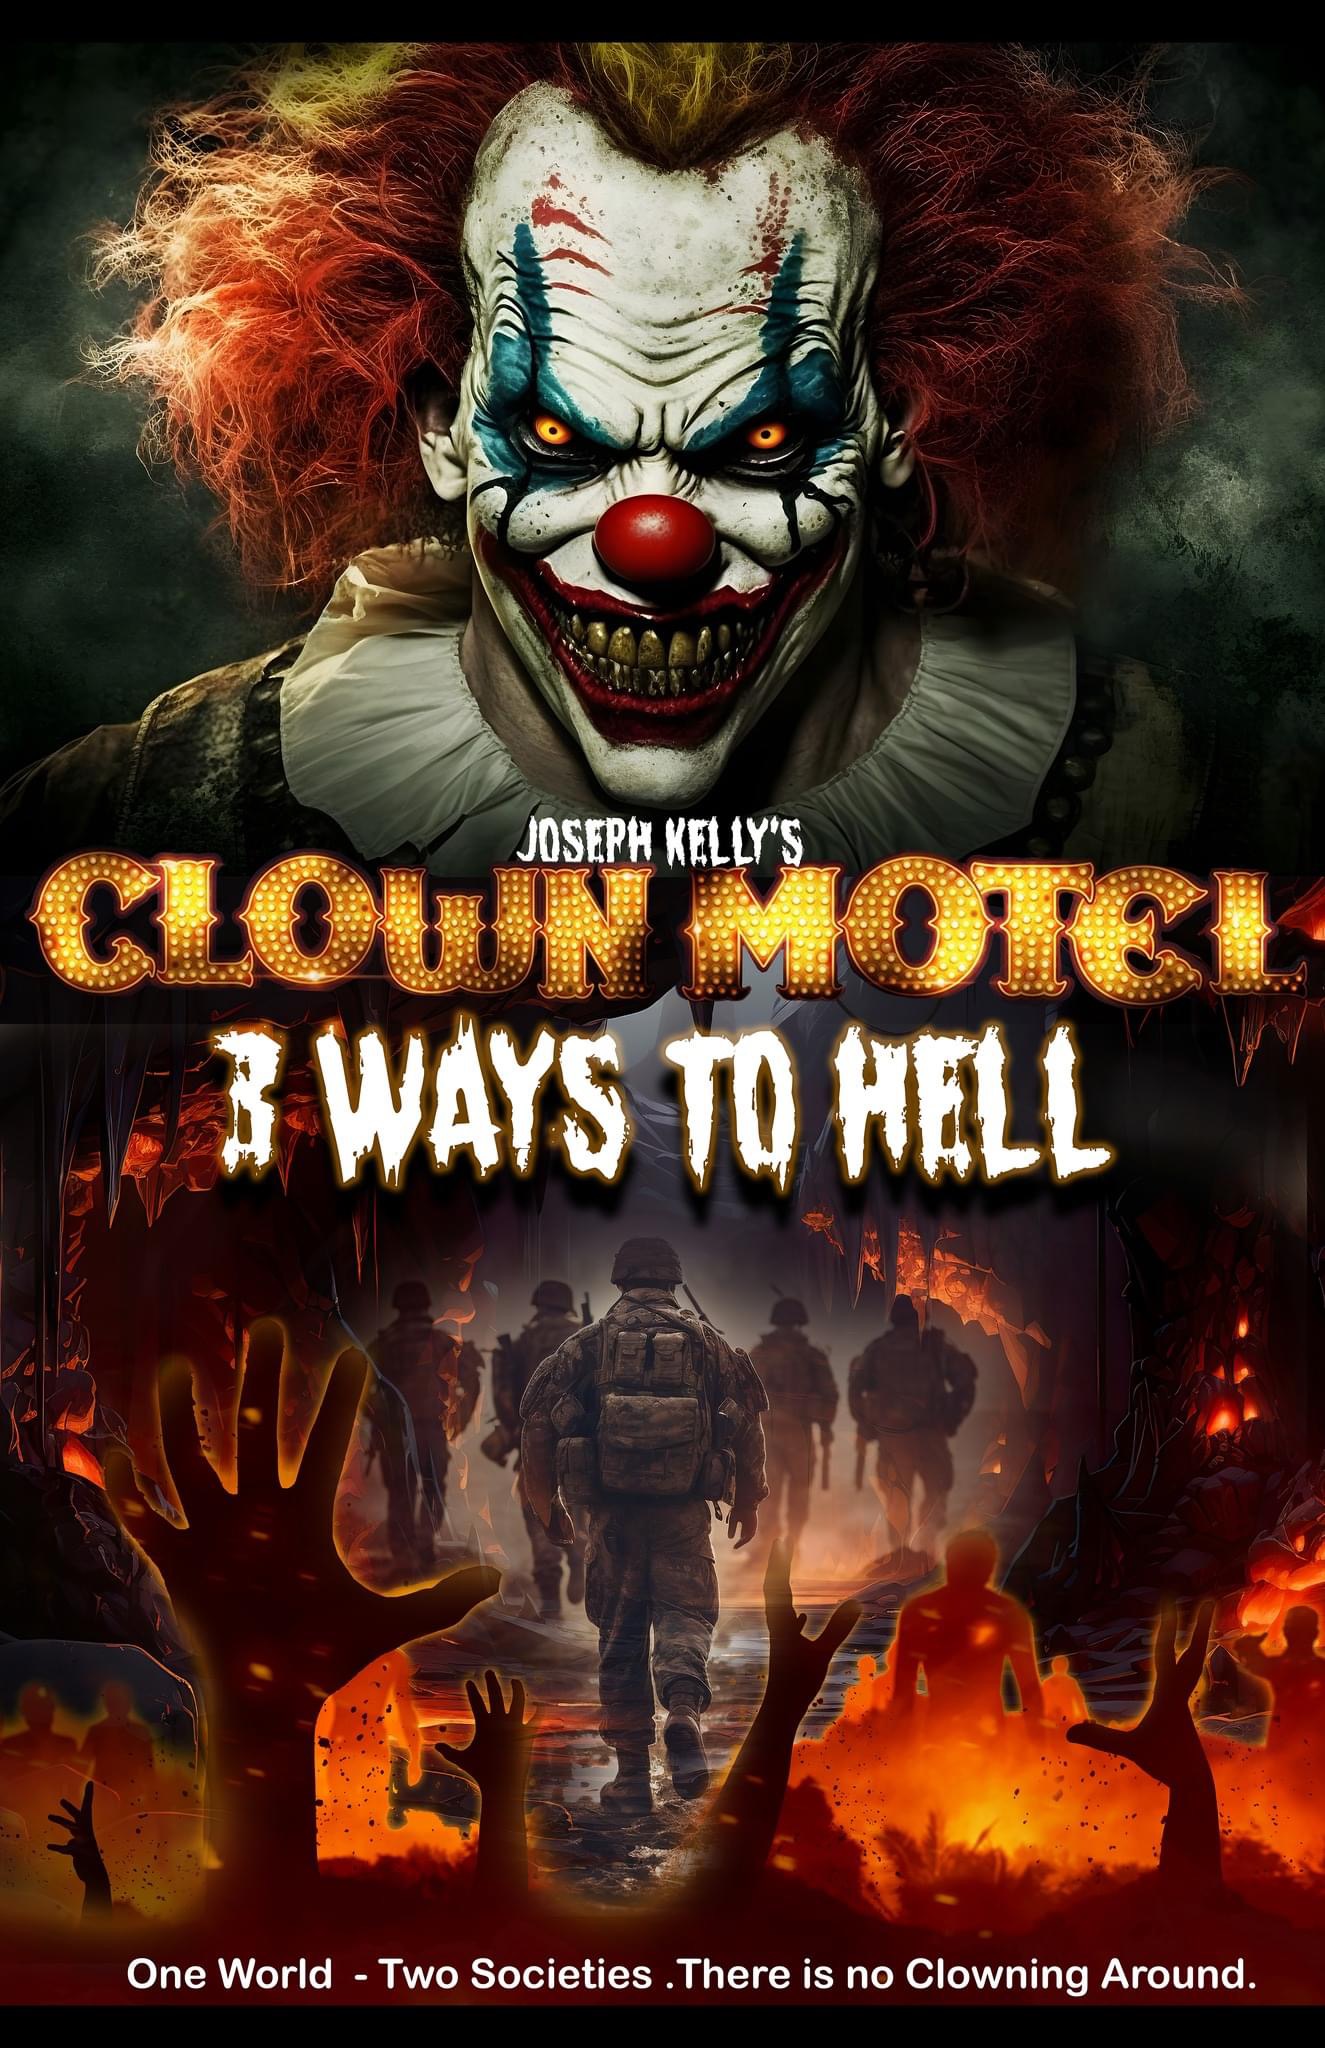 Join The Team: Joseph Kelly’s "Clown Motel: 3 Ways to Hell" Launches Indiegogo Campaign